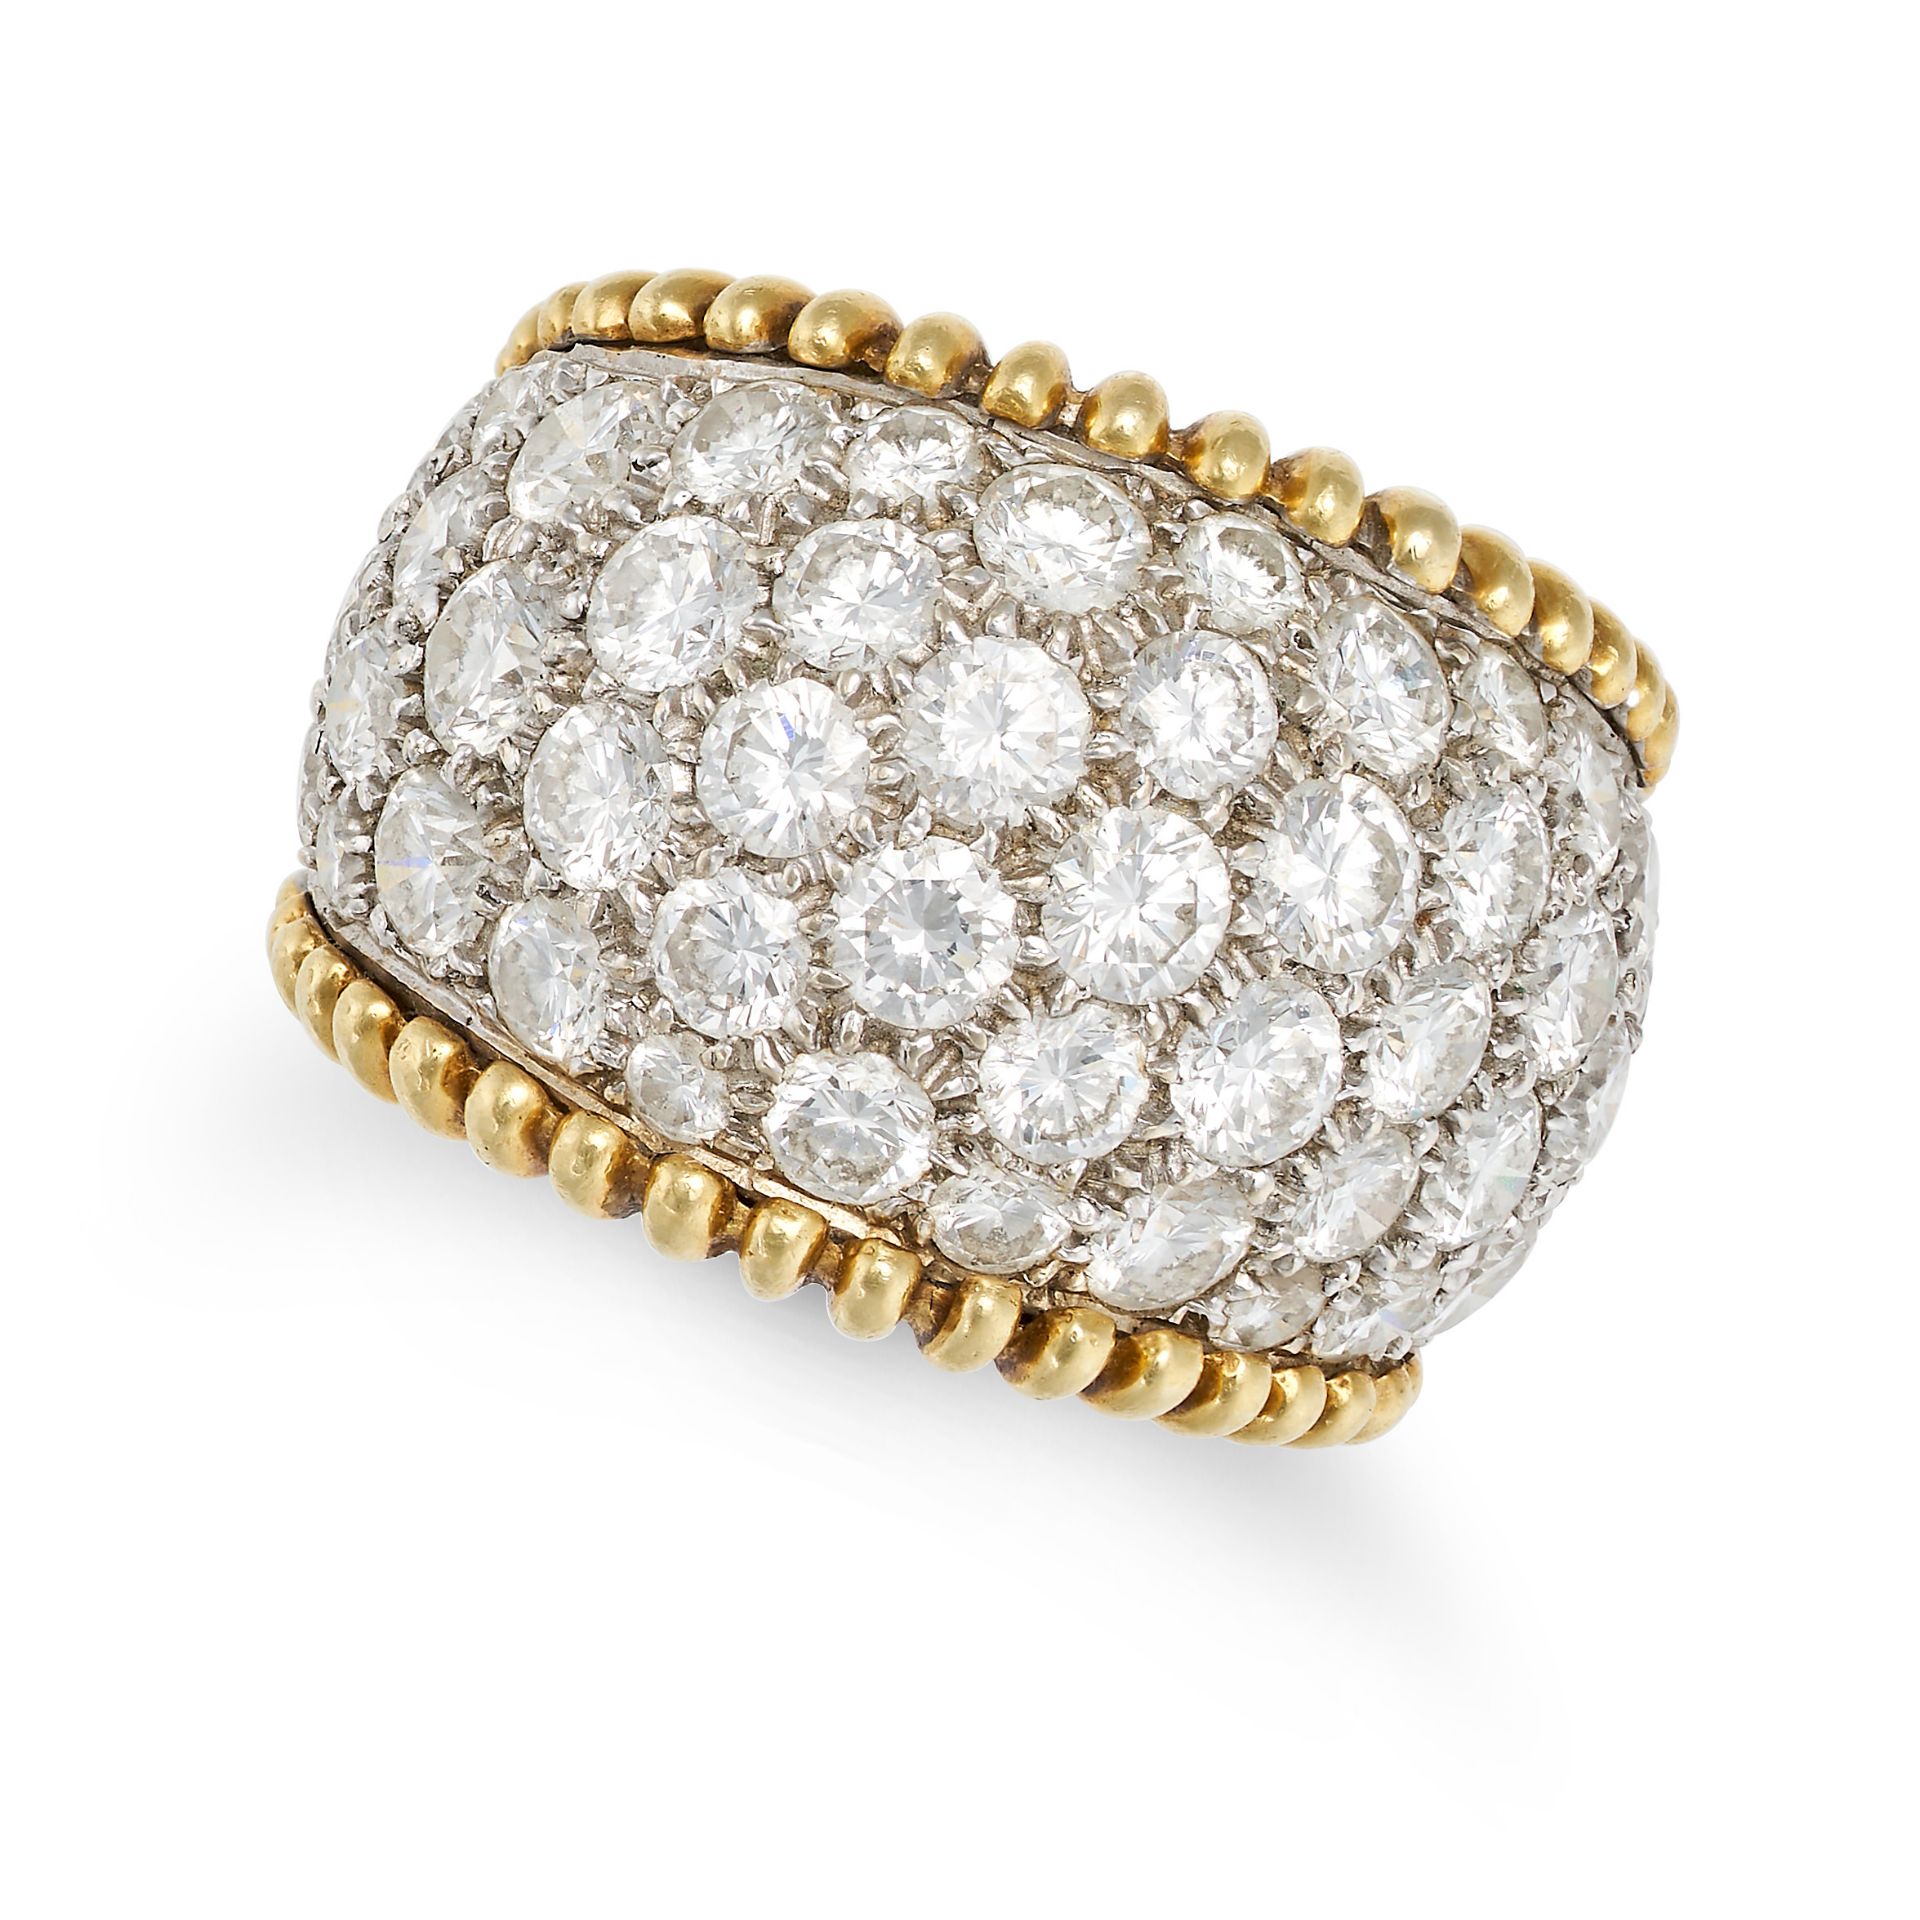 A DIAMOND DRESS RING in yellow and white gold, the tapering band pave throughout with round brill...